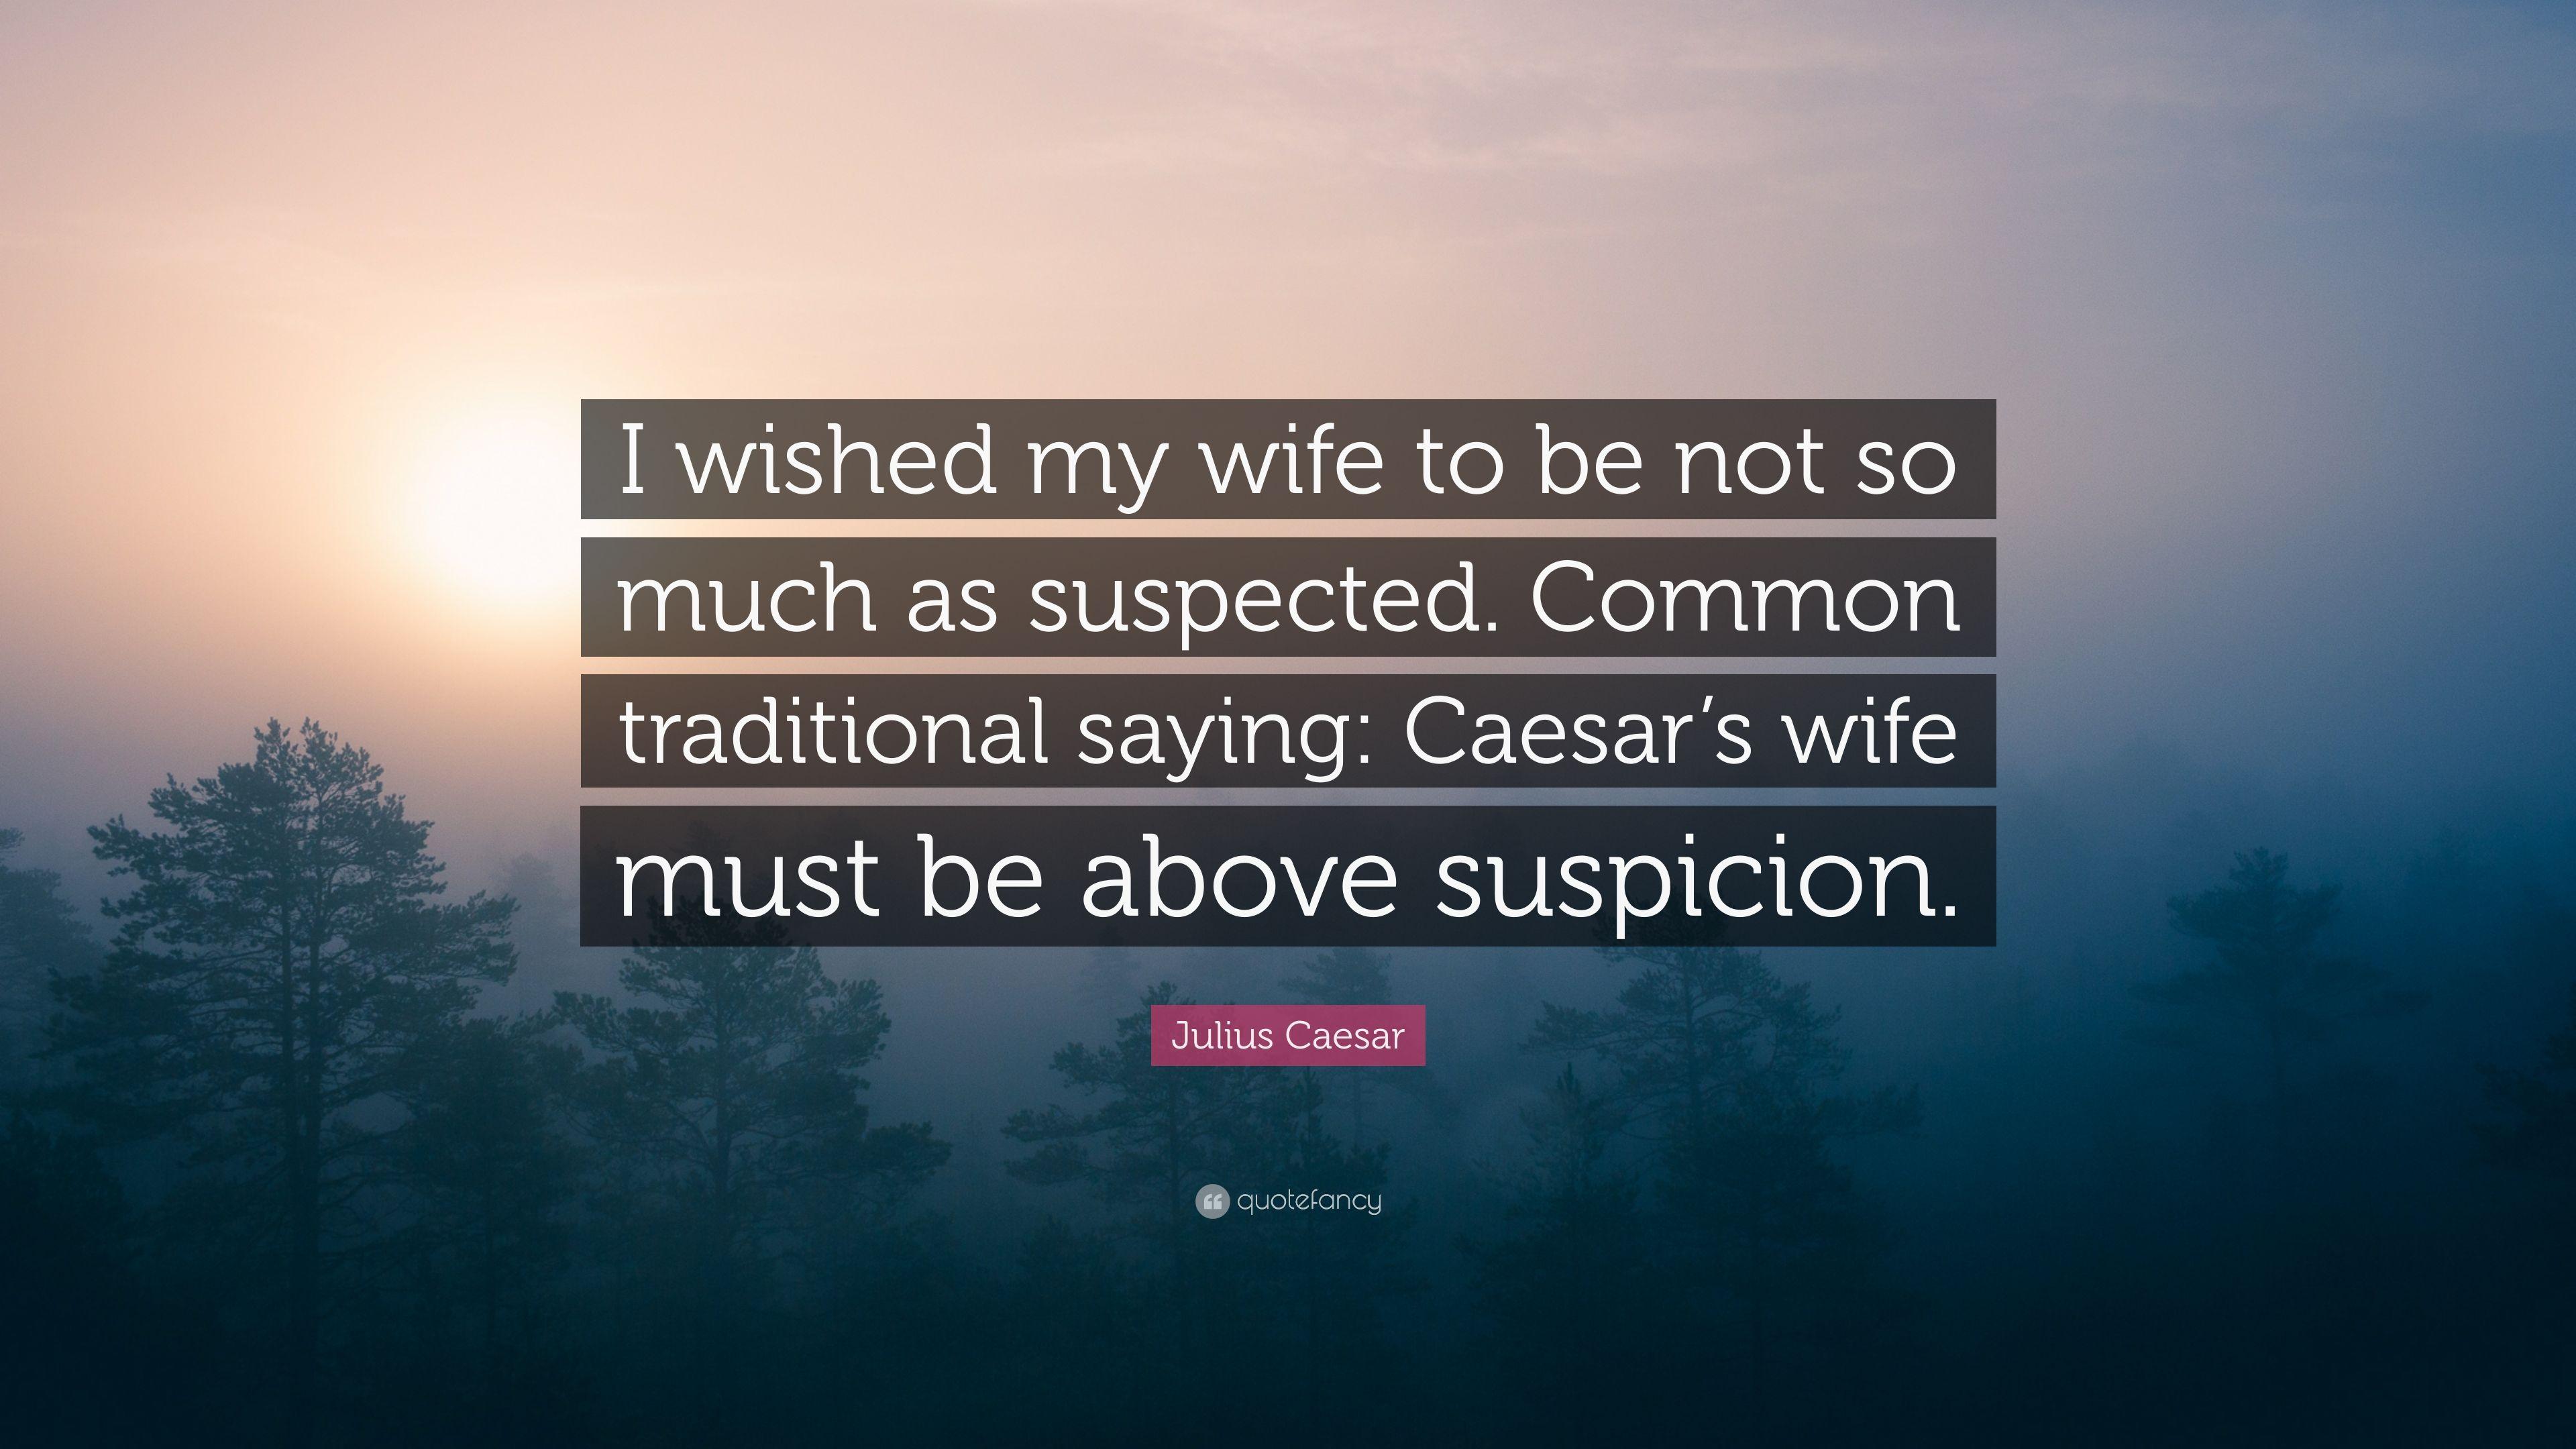 Julius Caesar Quote: “I wished my wife to be not so much as